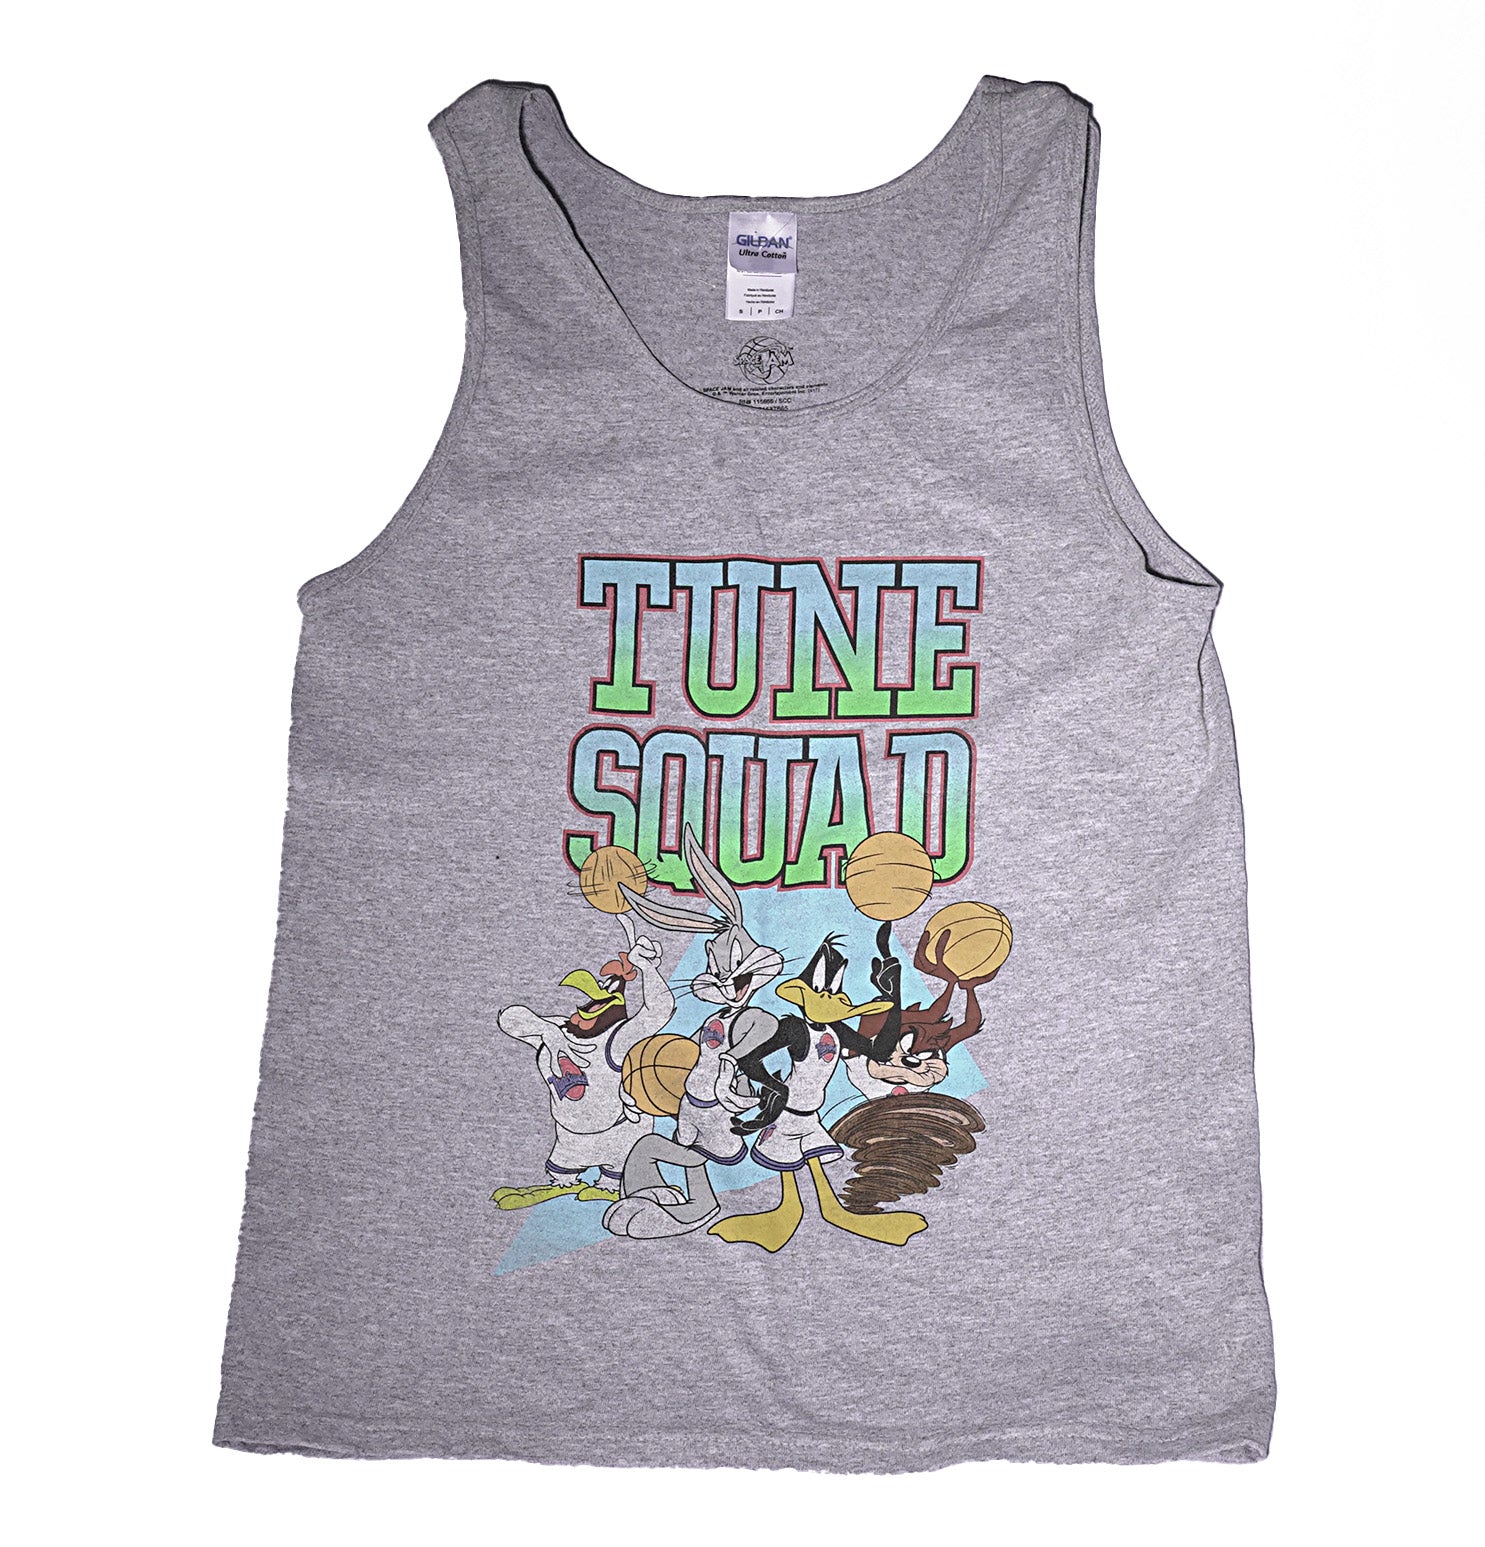 Space Jam Mens Tank Top - Tune Squad Distressed Group